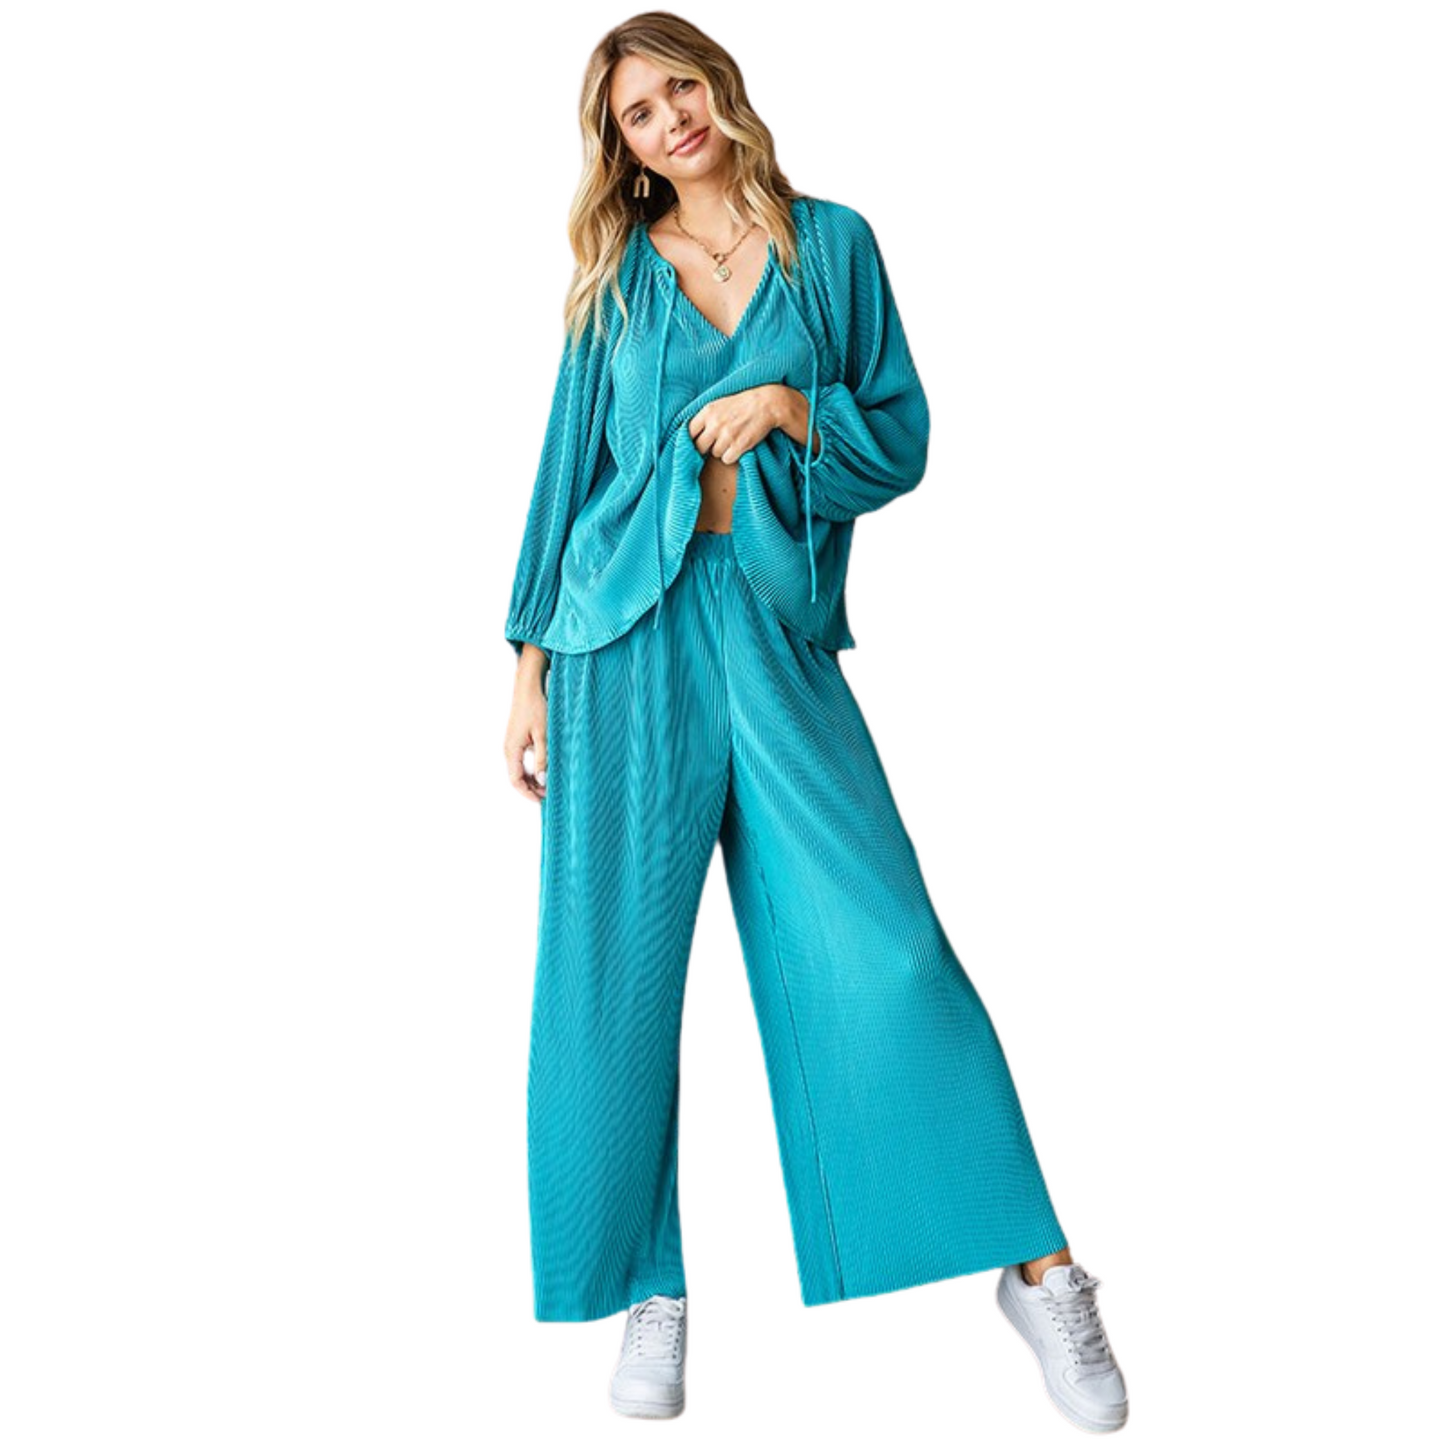 Effortlessly chic and comfortable, our Solid Color Pleated Top and Bottom Set is perfect for any occasion. The relaxed fit palazzo pants feature an elastic banded waistline for a flattering and comfortable fit. Paired with the matching top, this set is a must-have in your wardrobe. Available in a stunning teal color.